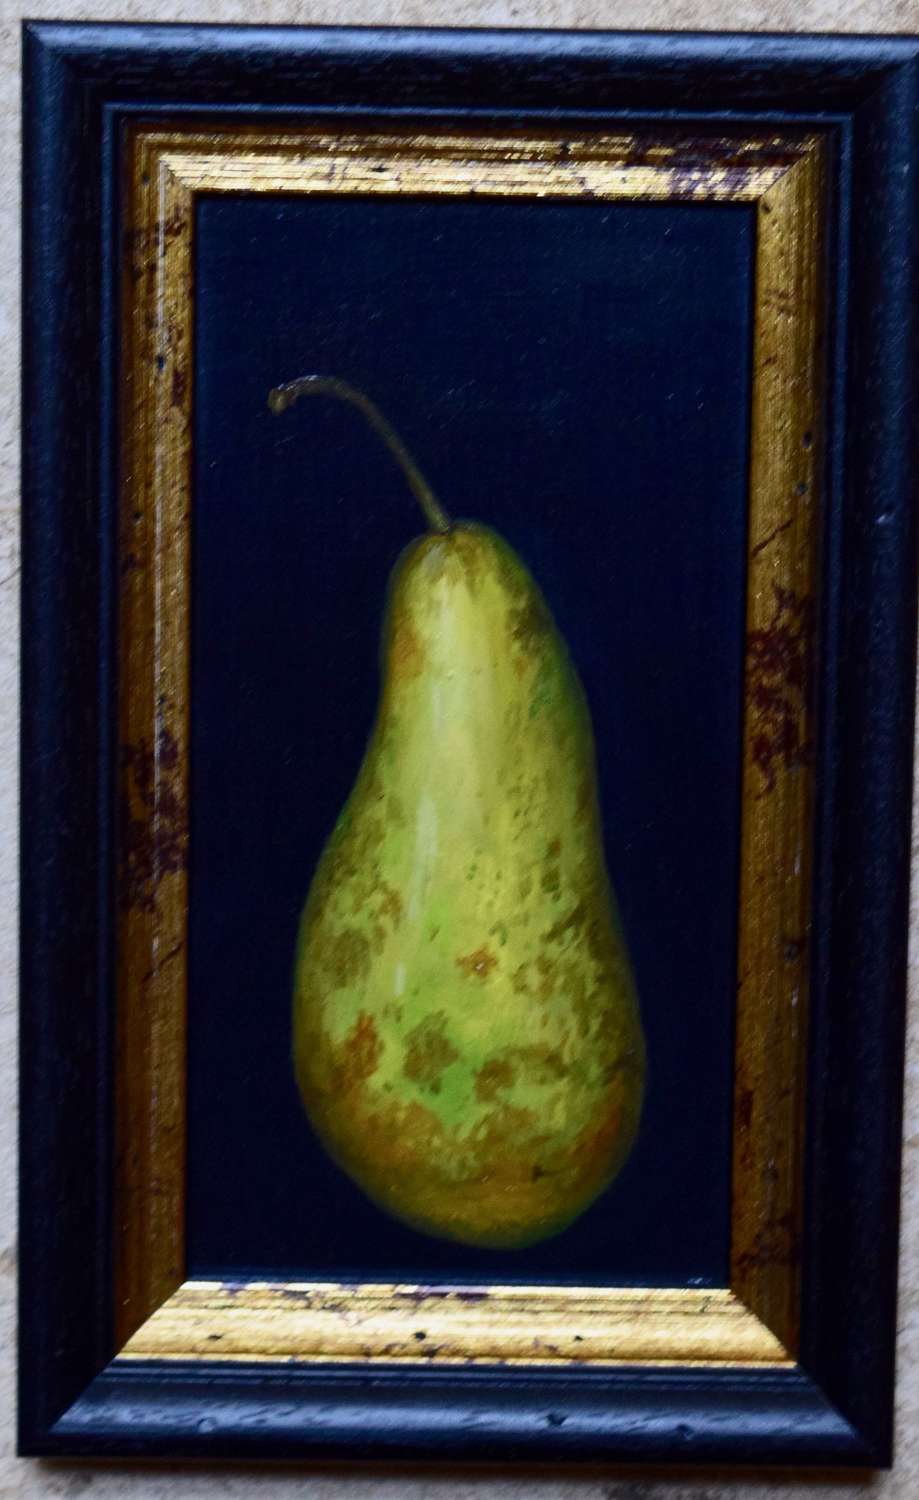 Conference pear